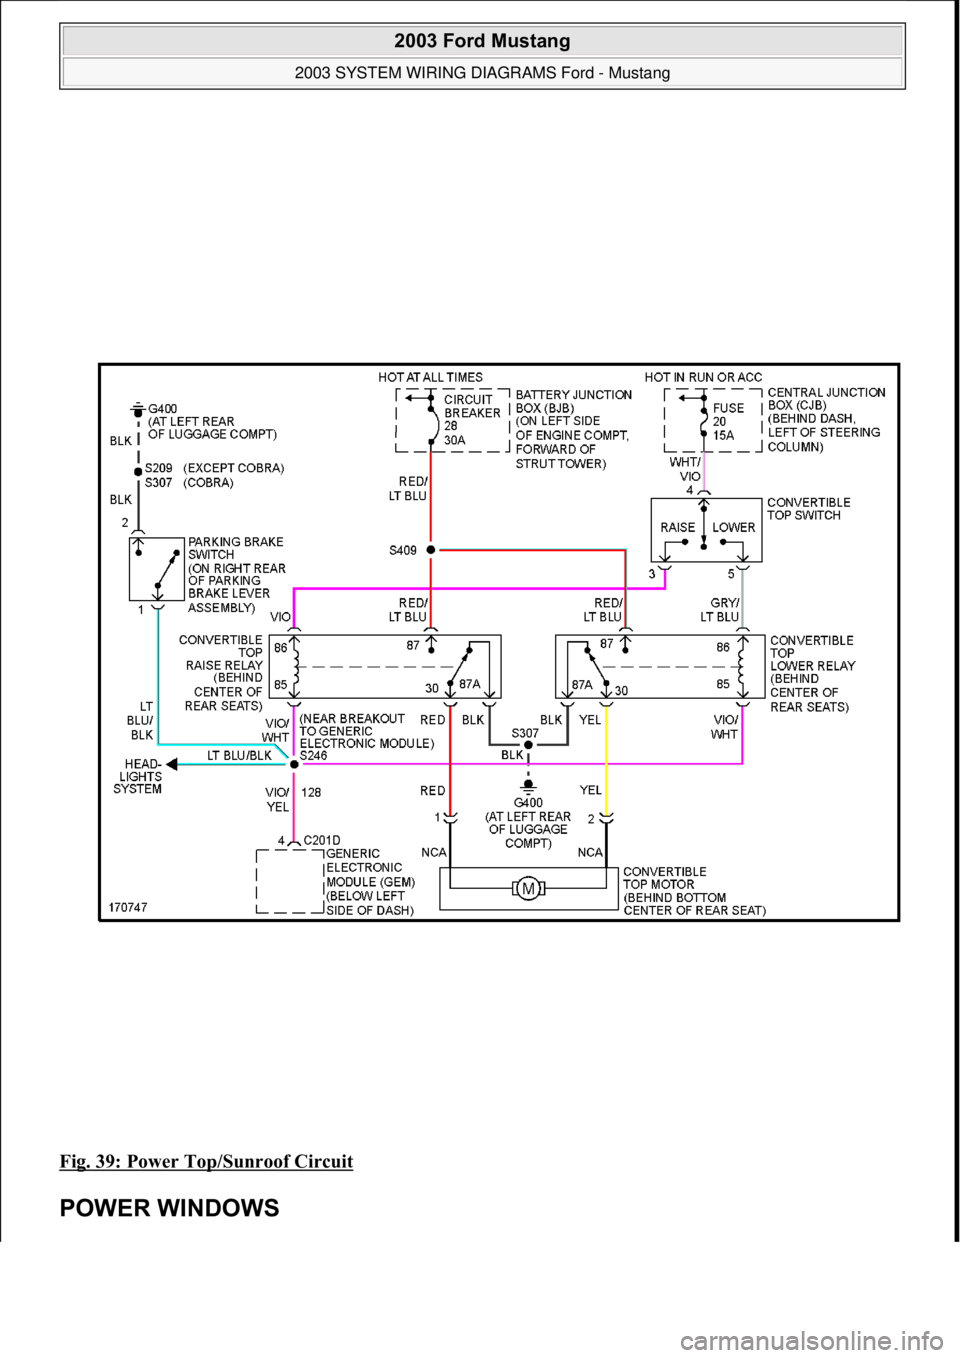 FORD MUSTANG 2003  Workshop Manual Fig. 39: Power Top/Sunroof Circuit 
POWER WINDOWS 
 
2003 Ford Mustang 
2003 SYSTEM WIRING DIAGRAMS Ford - Mustang  
111  
18 ноября  2011 г. 12:45:09Page 40 © 2006 Mitchell Repair Information